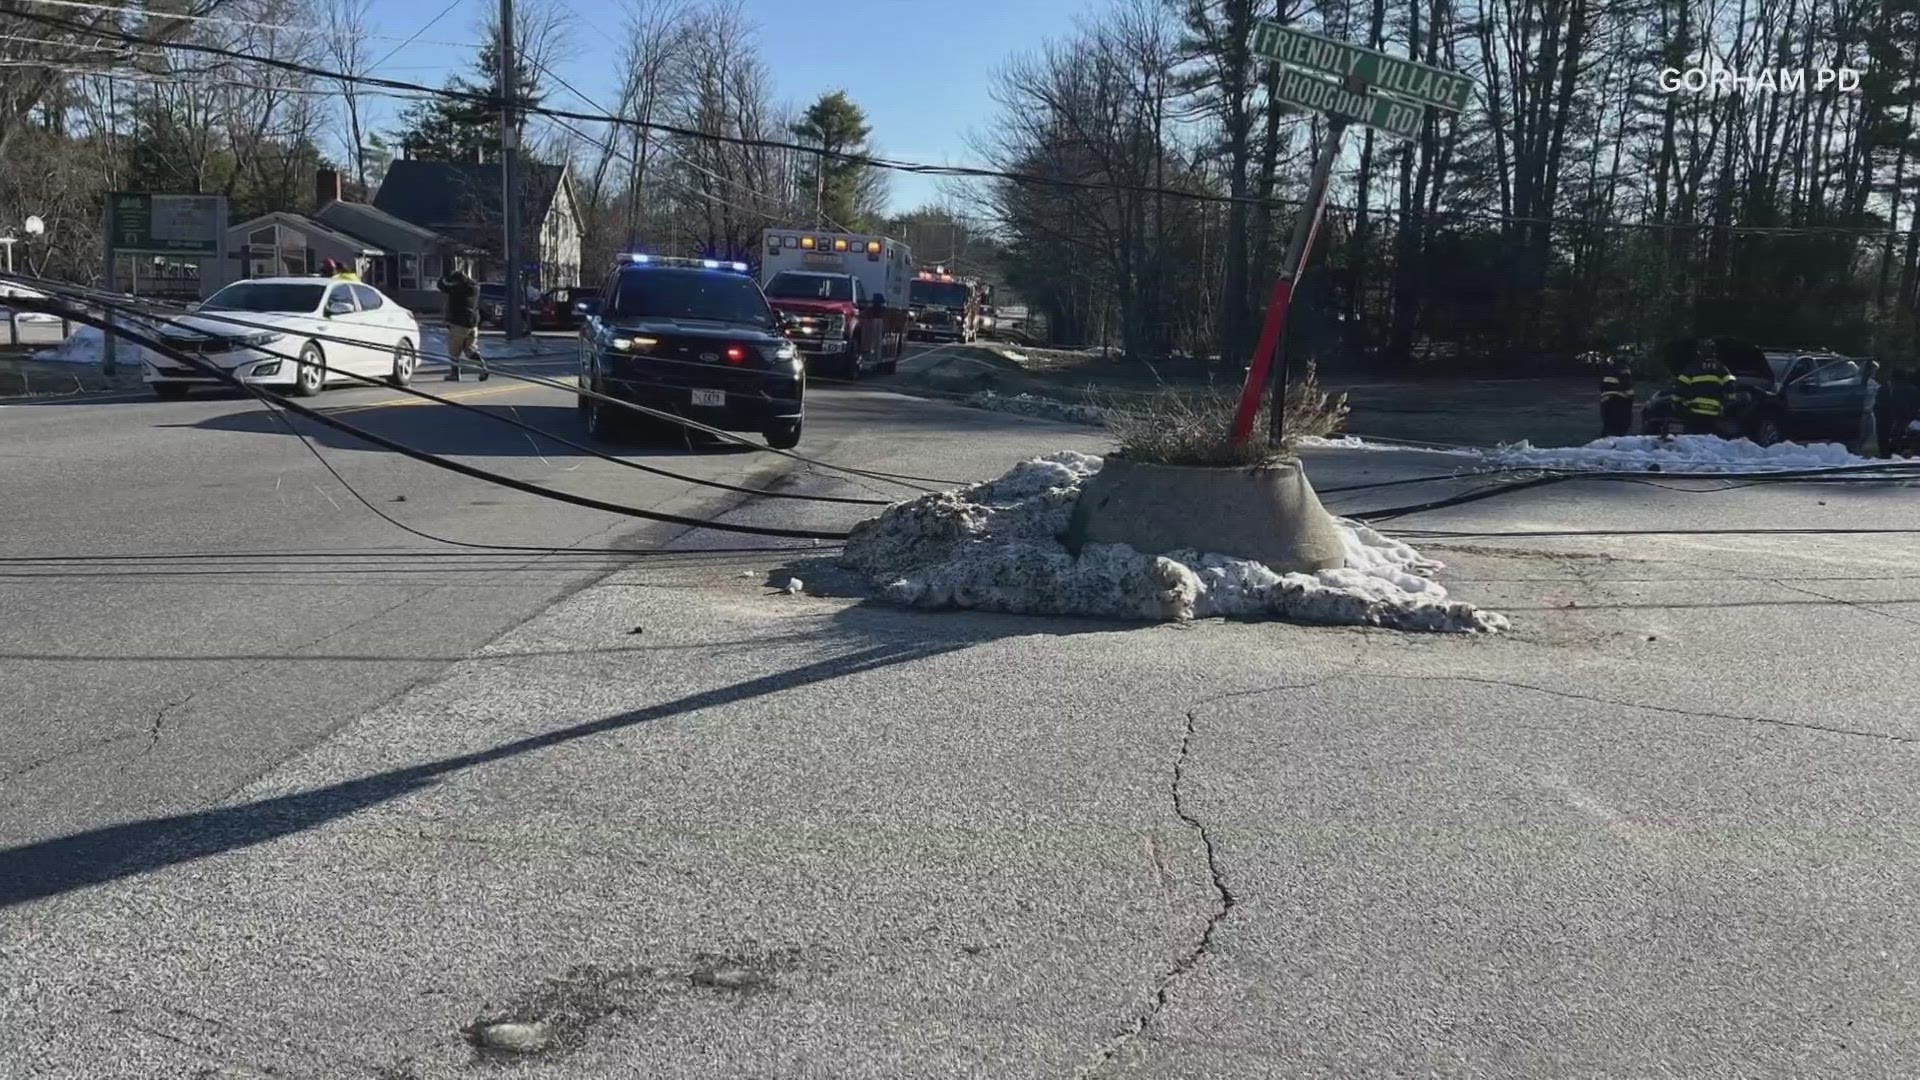 County Road, also known as Route 22, was closed from Deering Road to Scarborough Corner after a crash causes extensive damage.